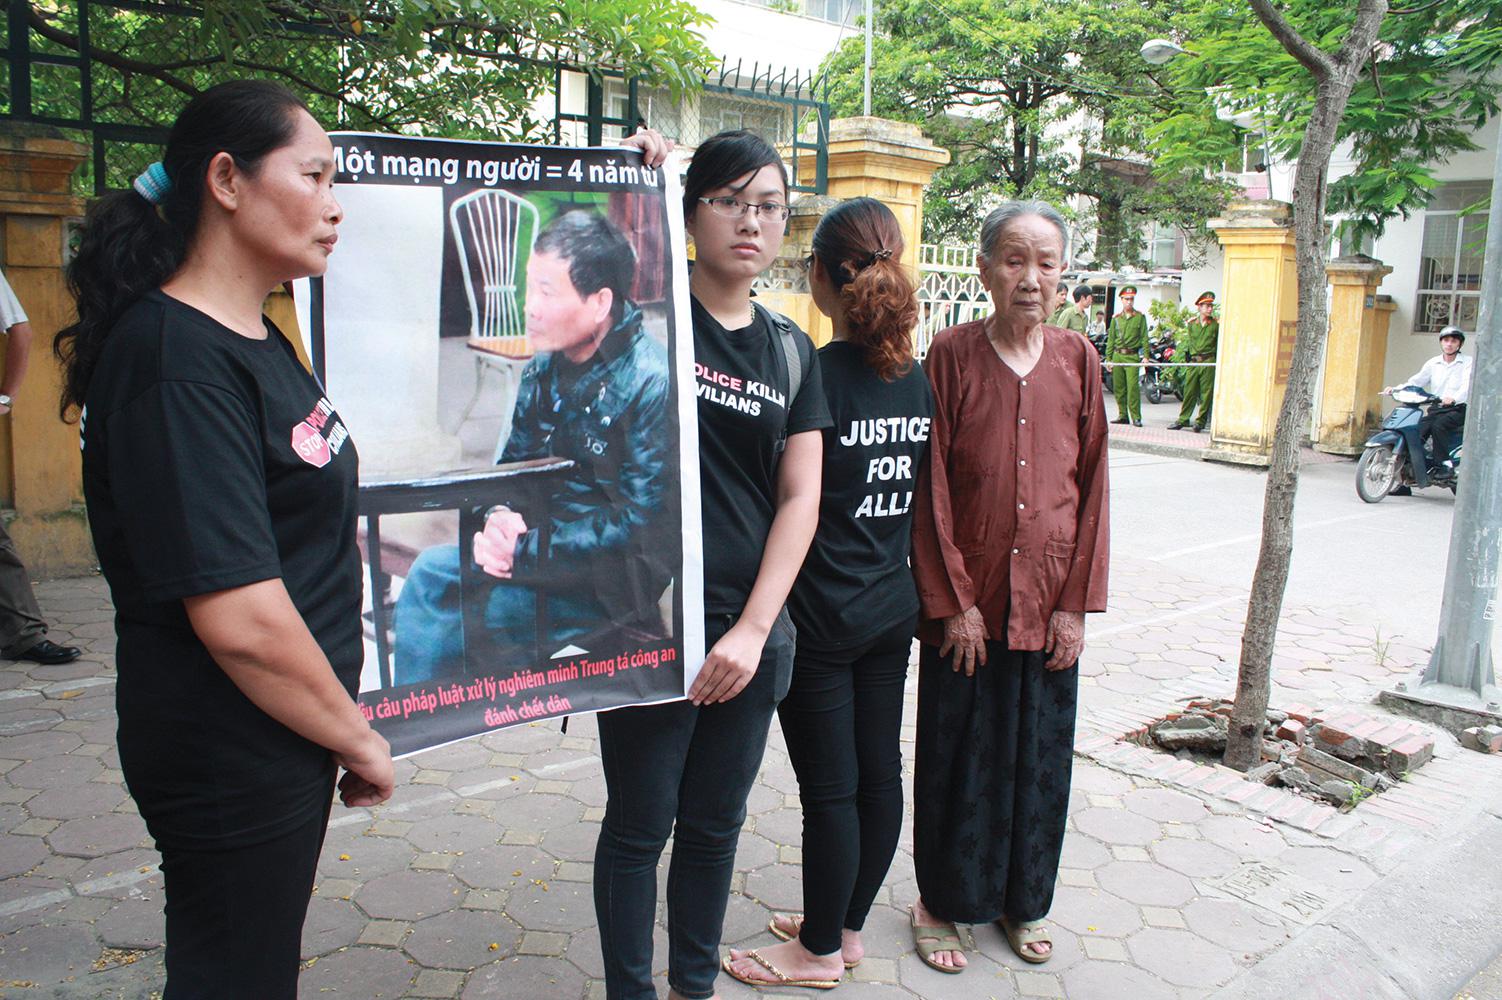 The family of Trinh Xuan Tung (his mother Nguyen Thi Cuc, his wife Nguyen Thi Mien, and his two daughters Trinh Kim Tien and Trinh Cam Tu) outside the court on July 17, 2012, waiting to attend appellate proceedings in the trial of former Coronel.